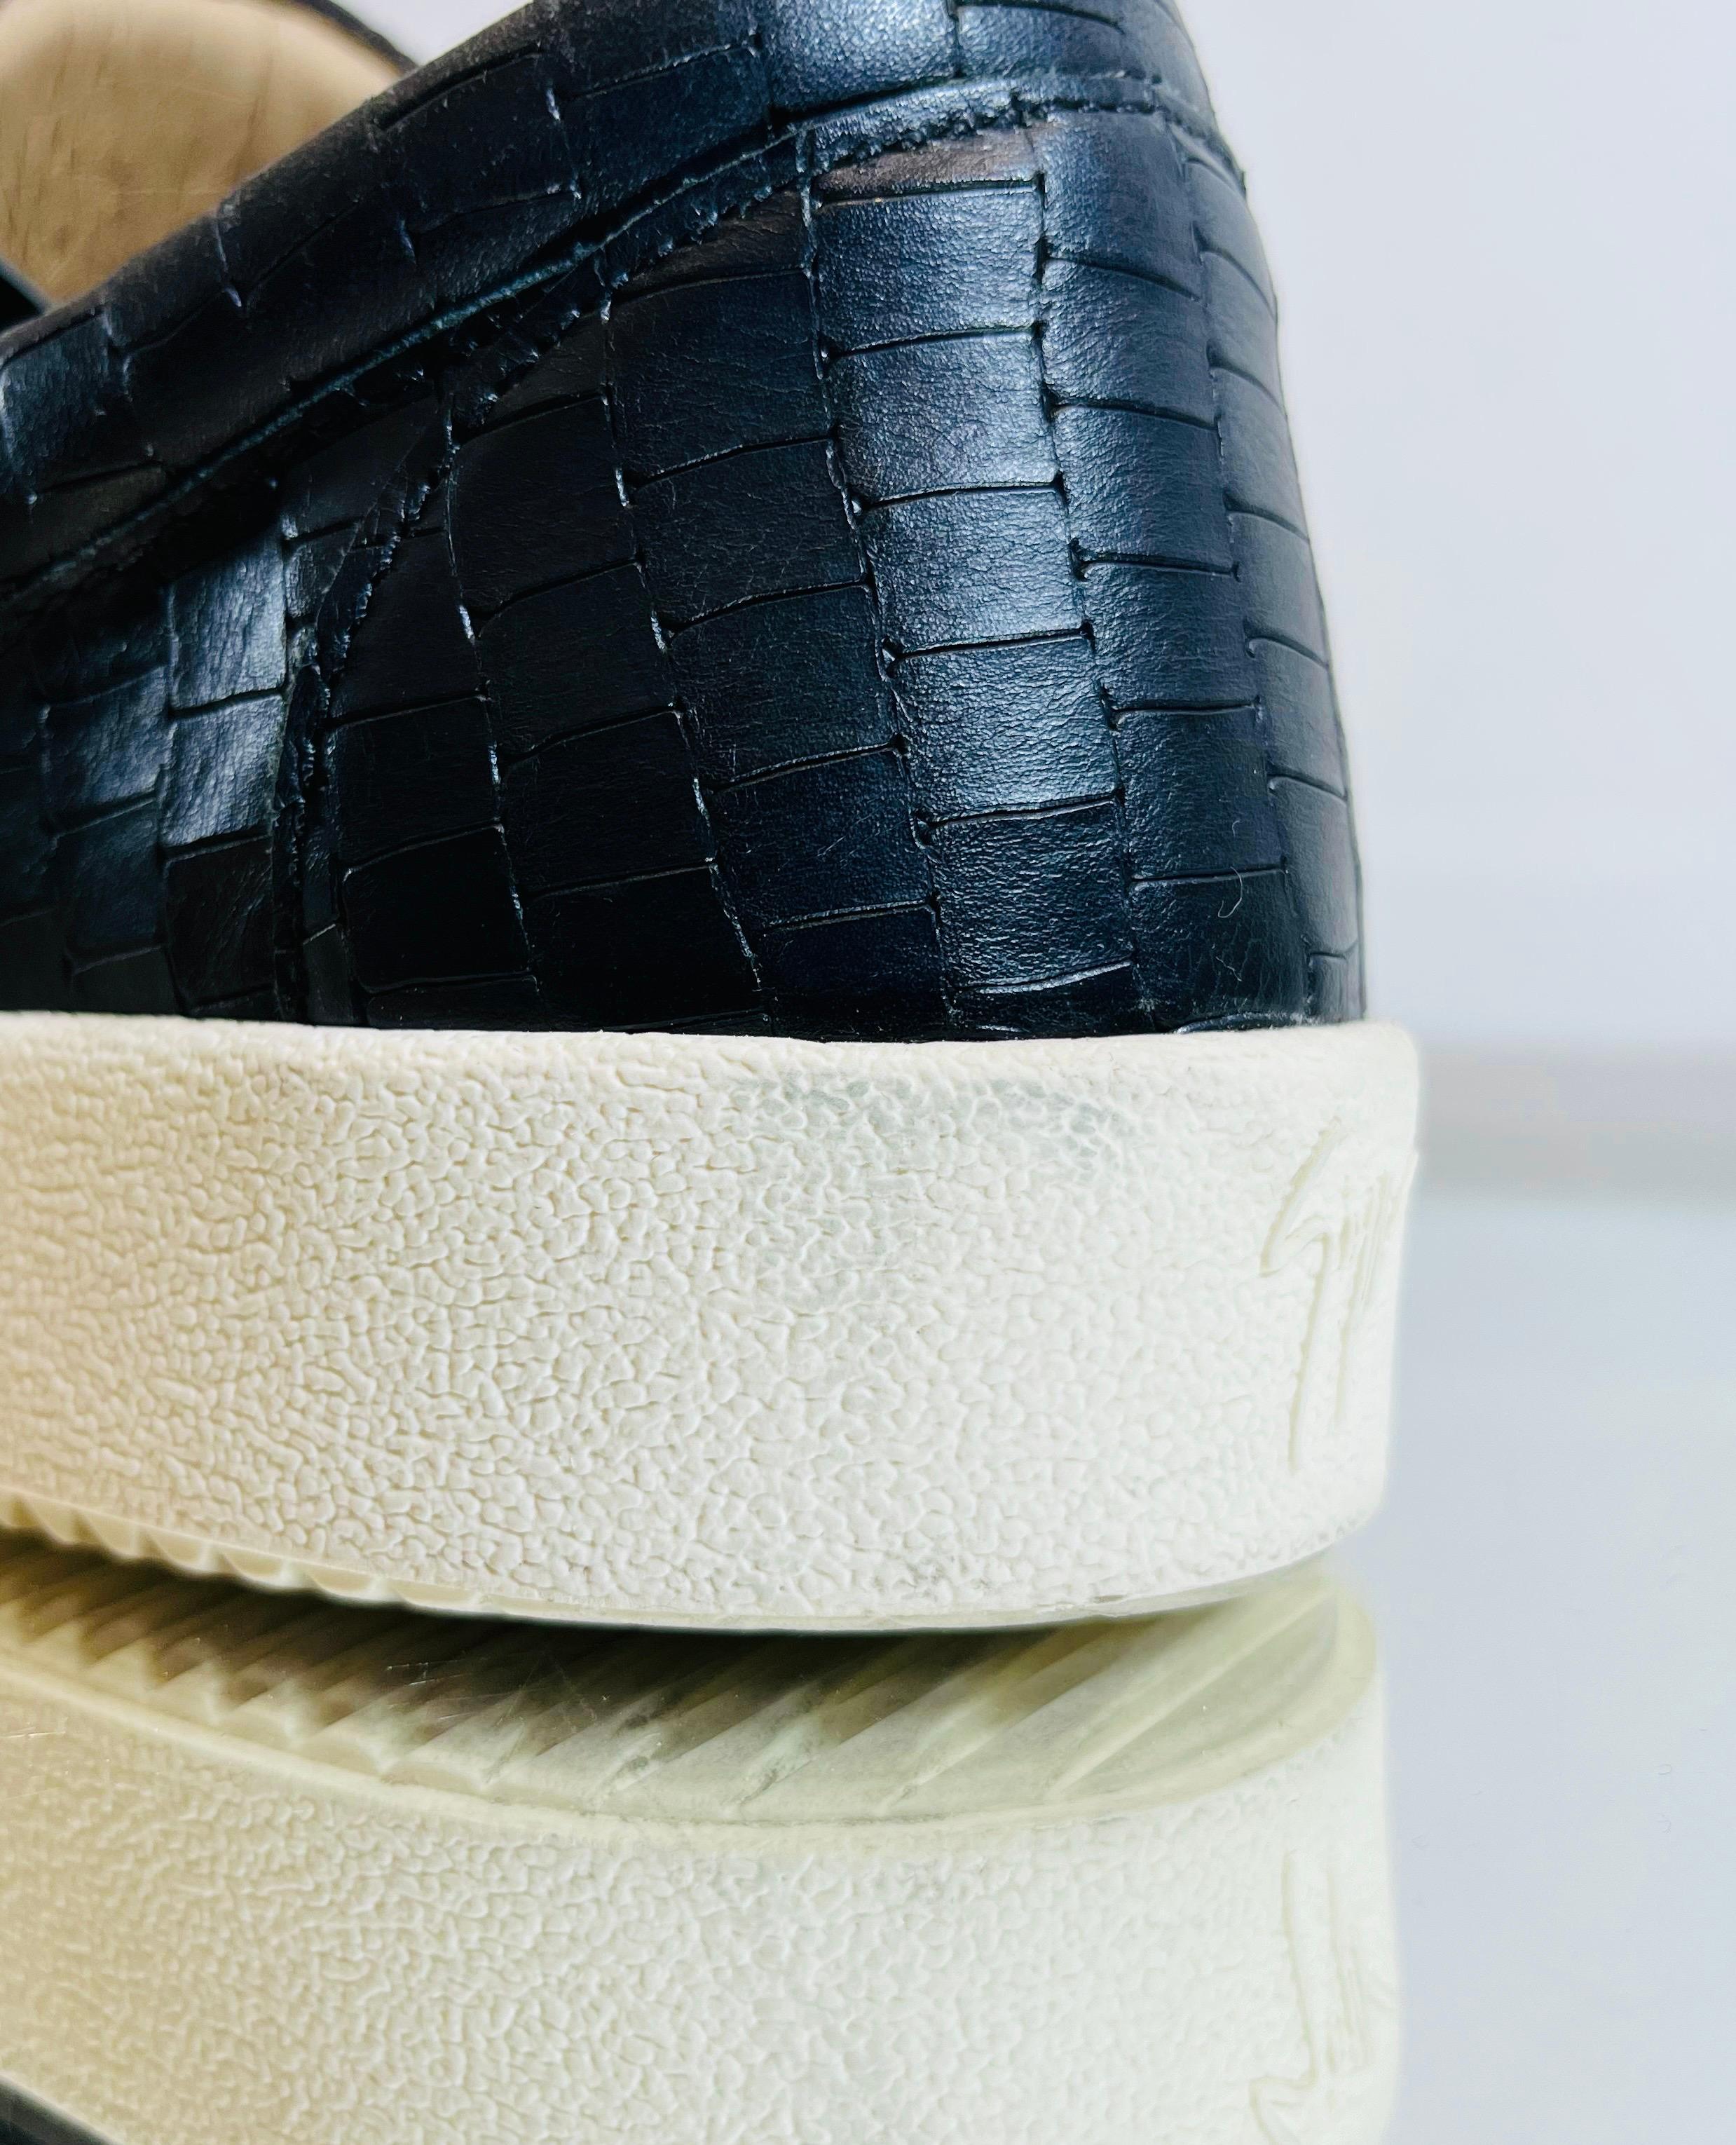 Giuseppe Zanotti Croc Embossed Leather Sneakers For Sale 3